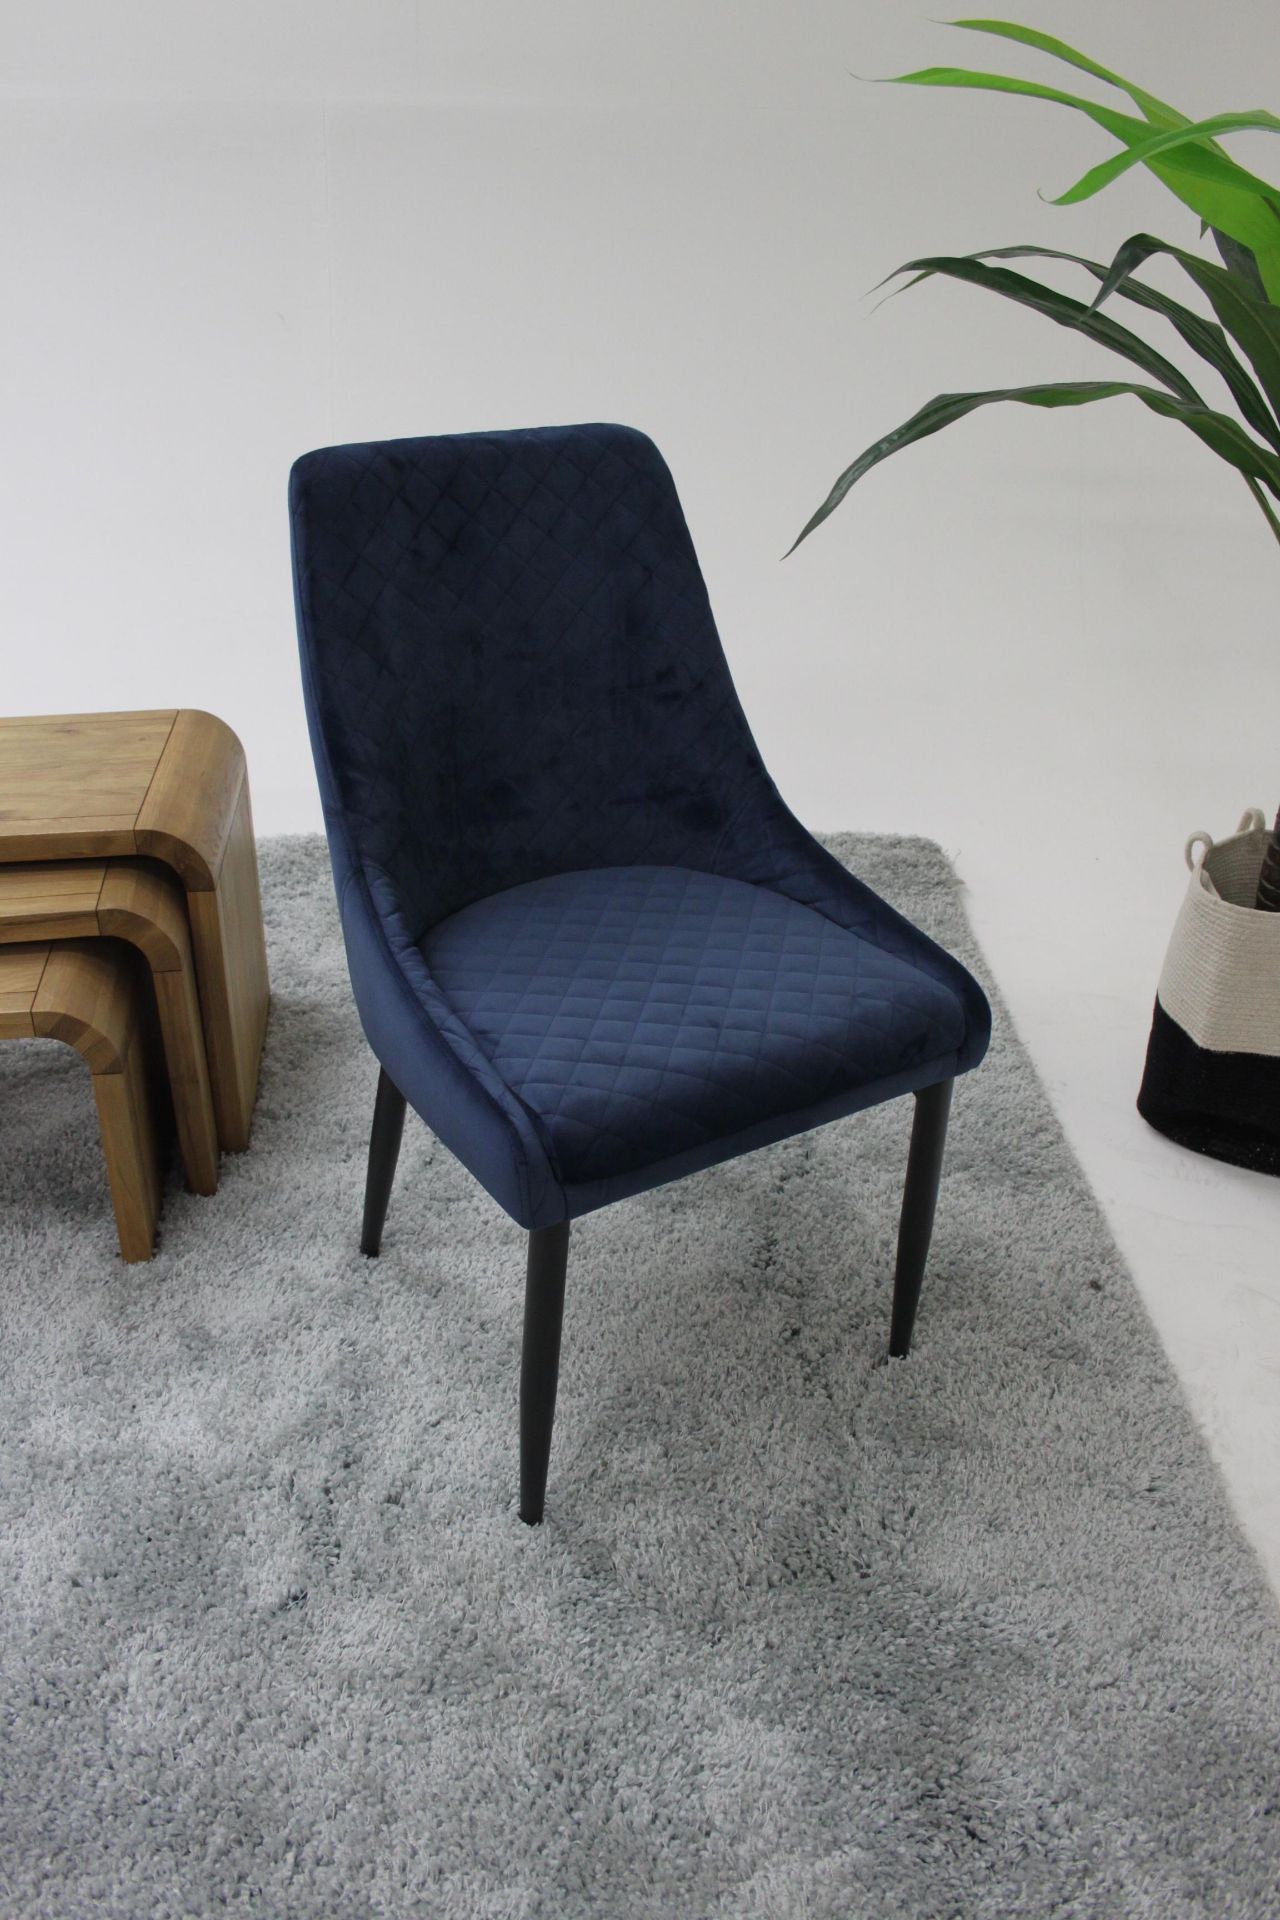 Aston Dining Chair Blue Velvet Quilted Dining Chair Is A Perfect Combination Of Functionality - Image 2 of 3